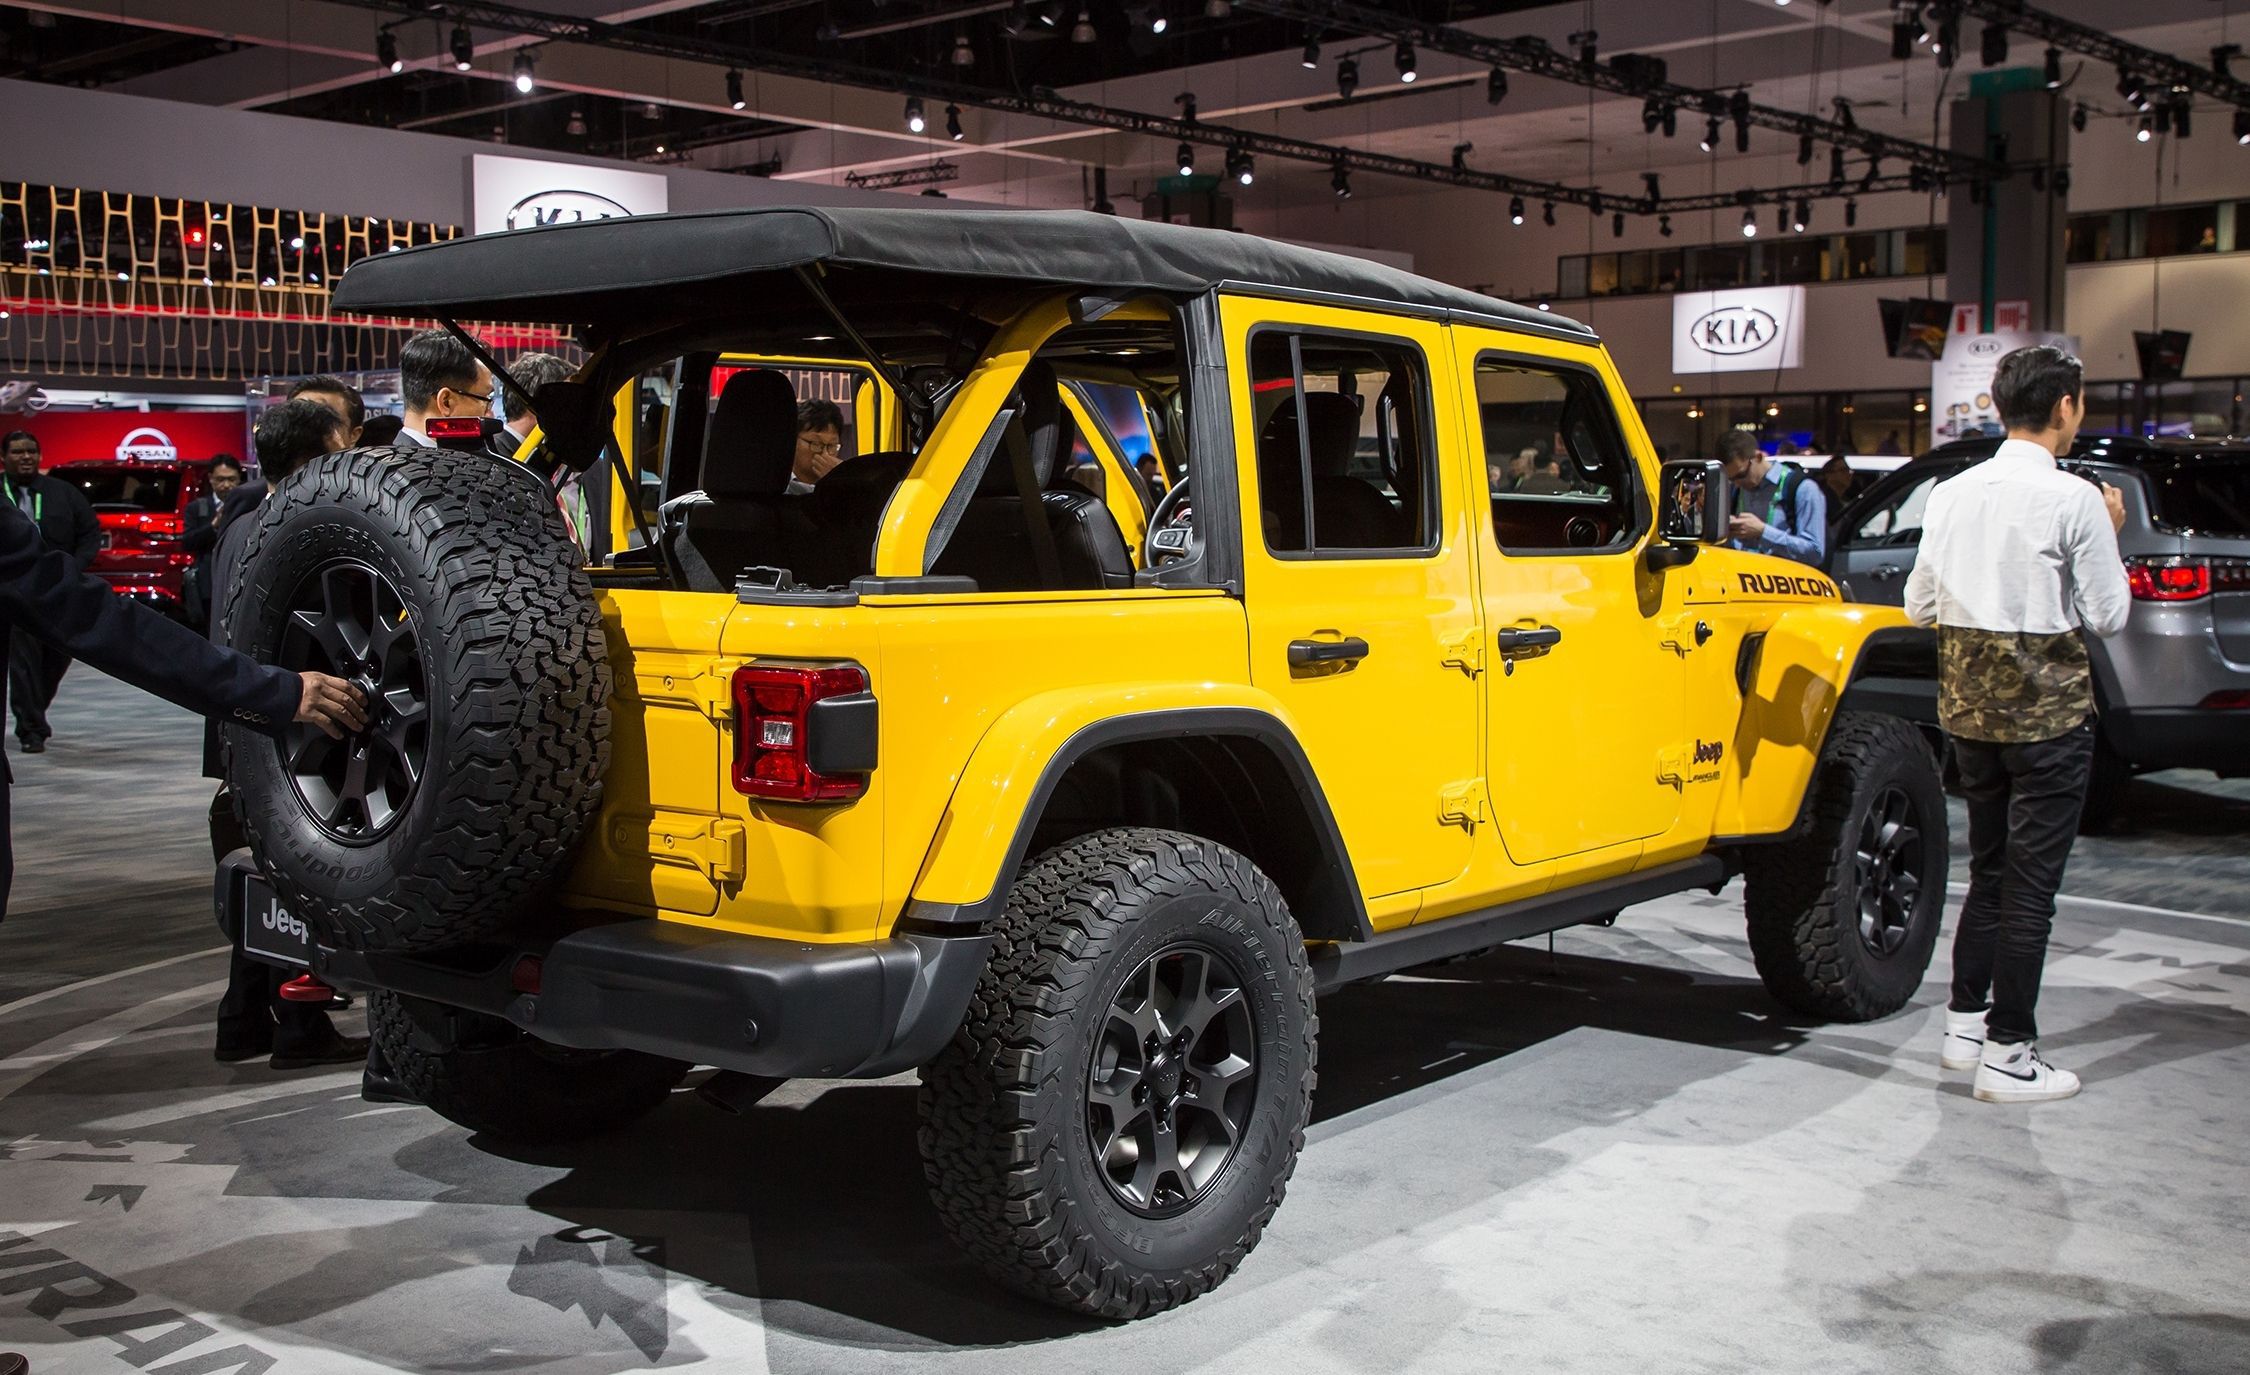 Jeep Things: What to Know About the All-New 2018 Wrangler